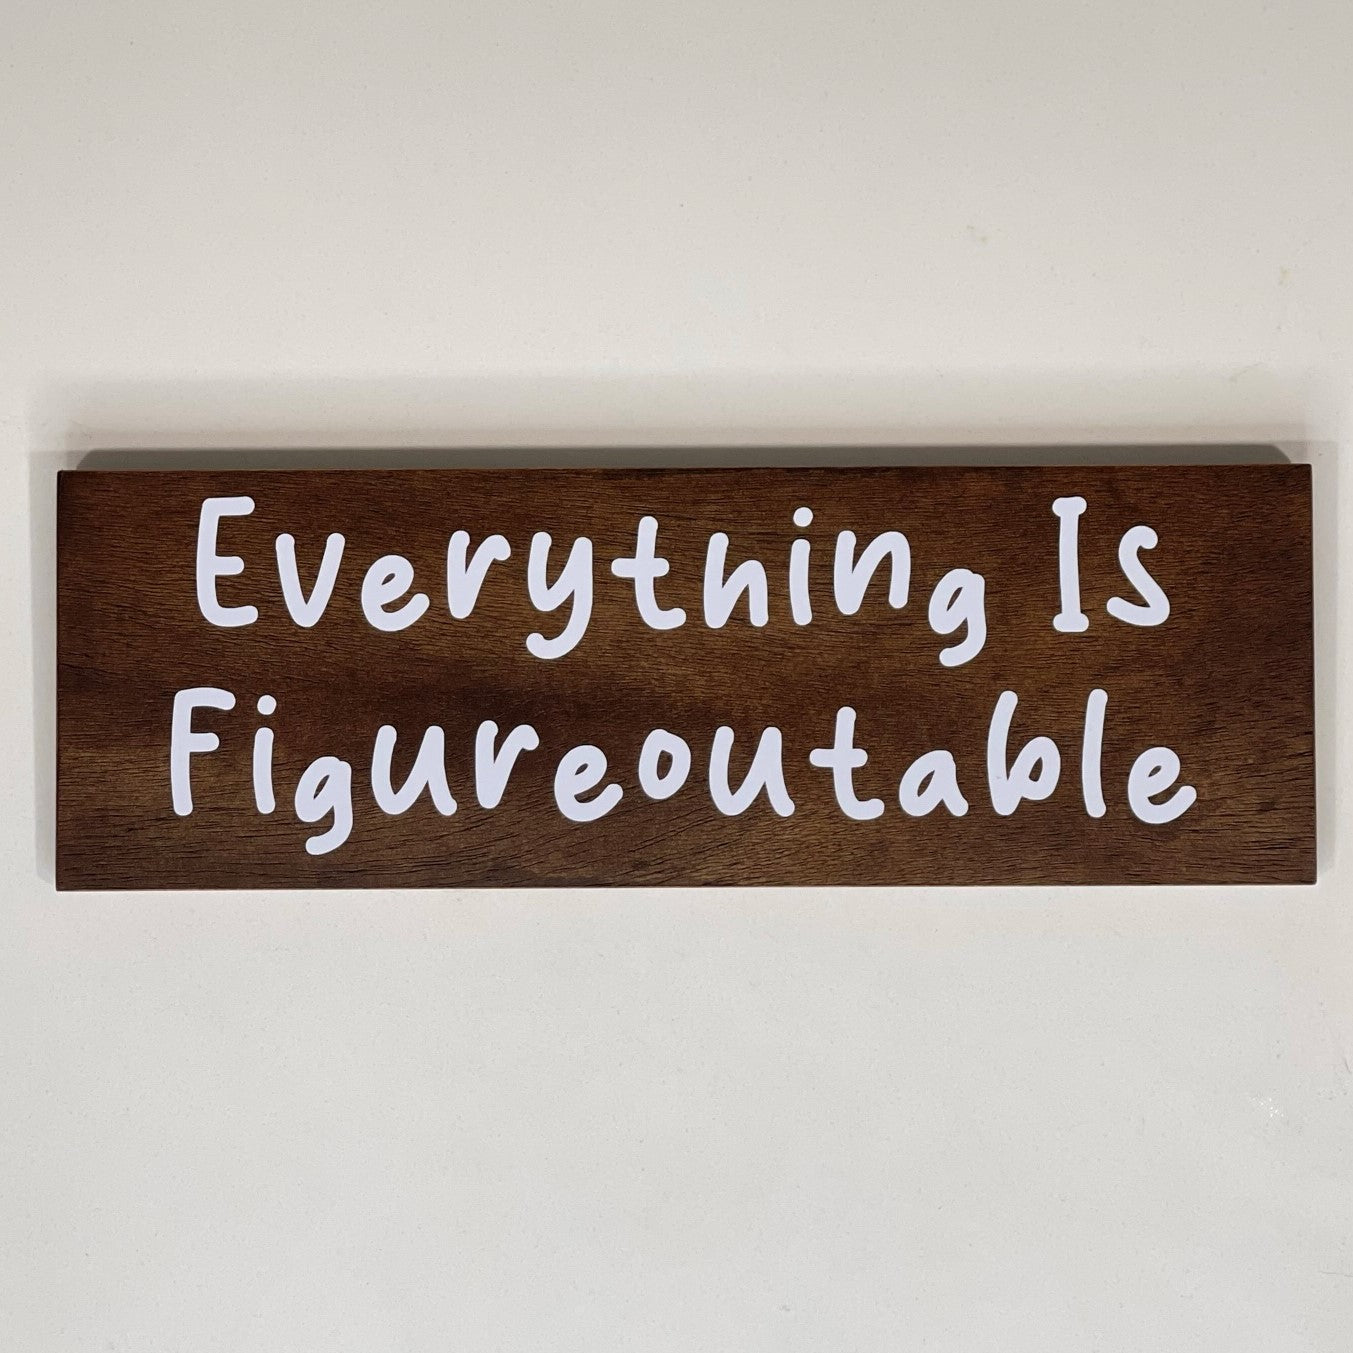 Everything Is Figureoutable - Funny Sign - Wall Decor - Bar Wall Art - Wooden Sign